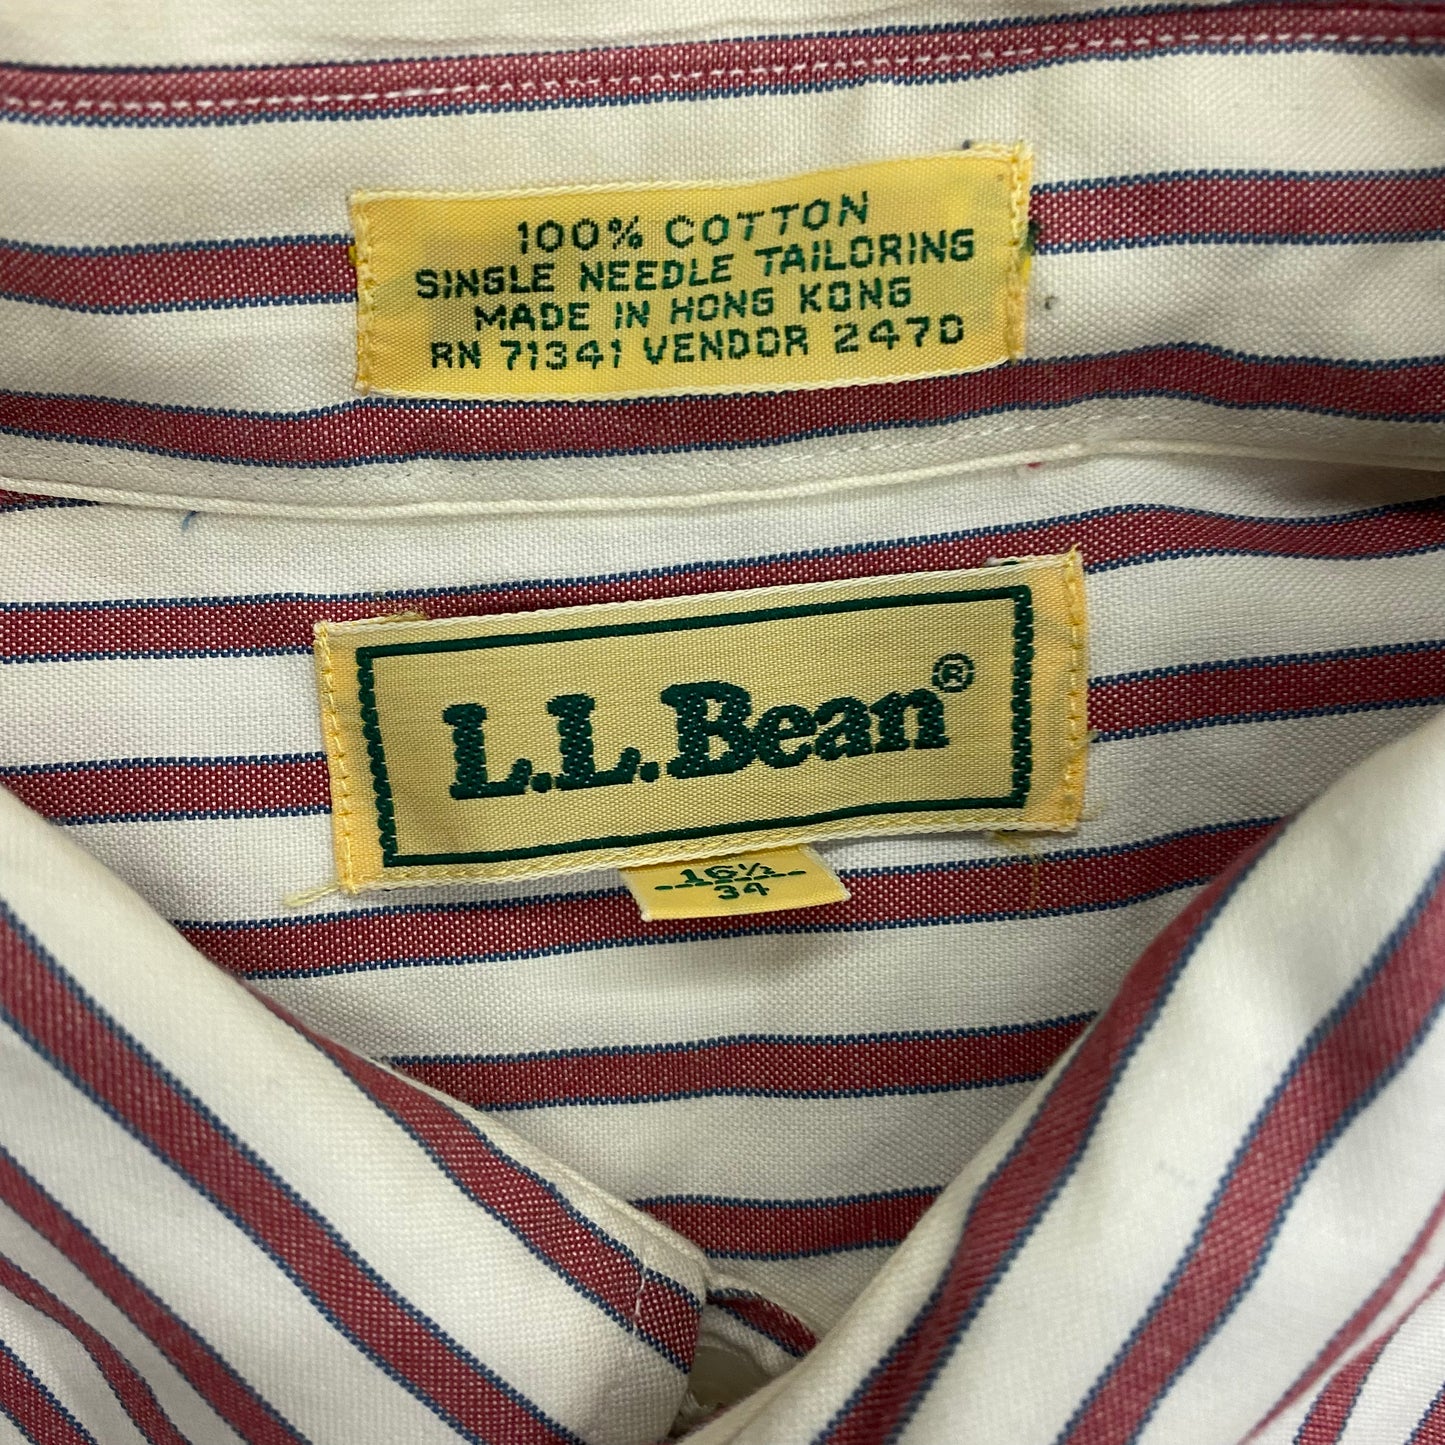 1980s LL Bean Red Striped Button Down Shirt - Size Large